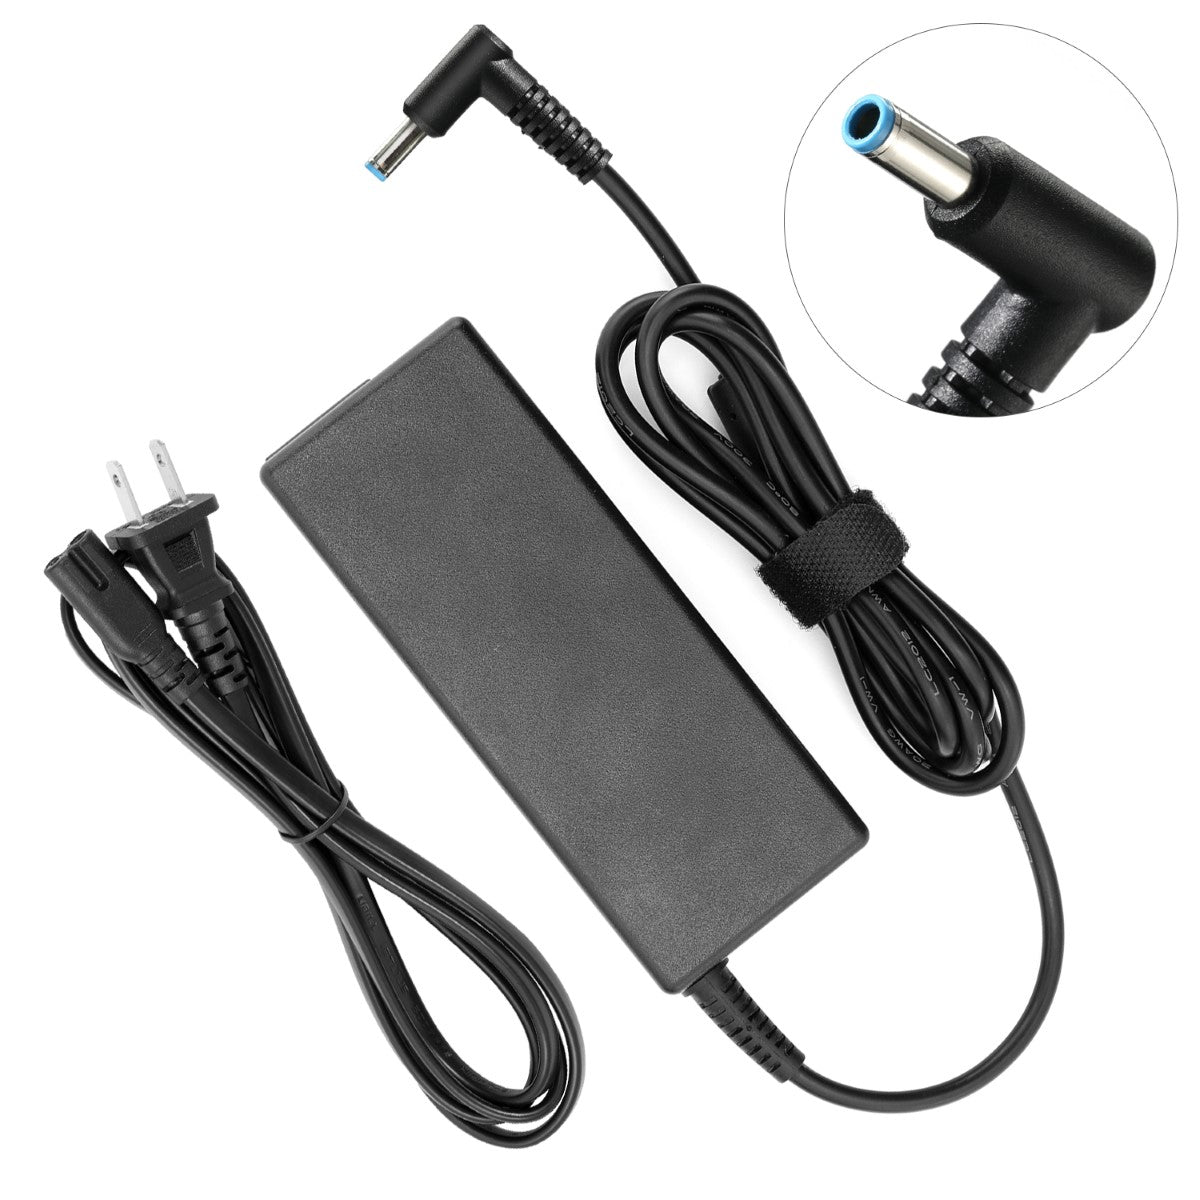 Charger for HP 15-f125wm Notebook.